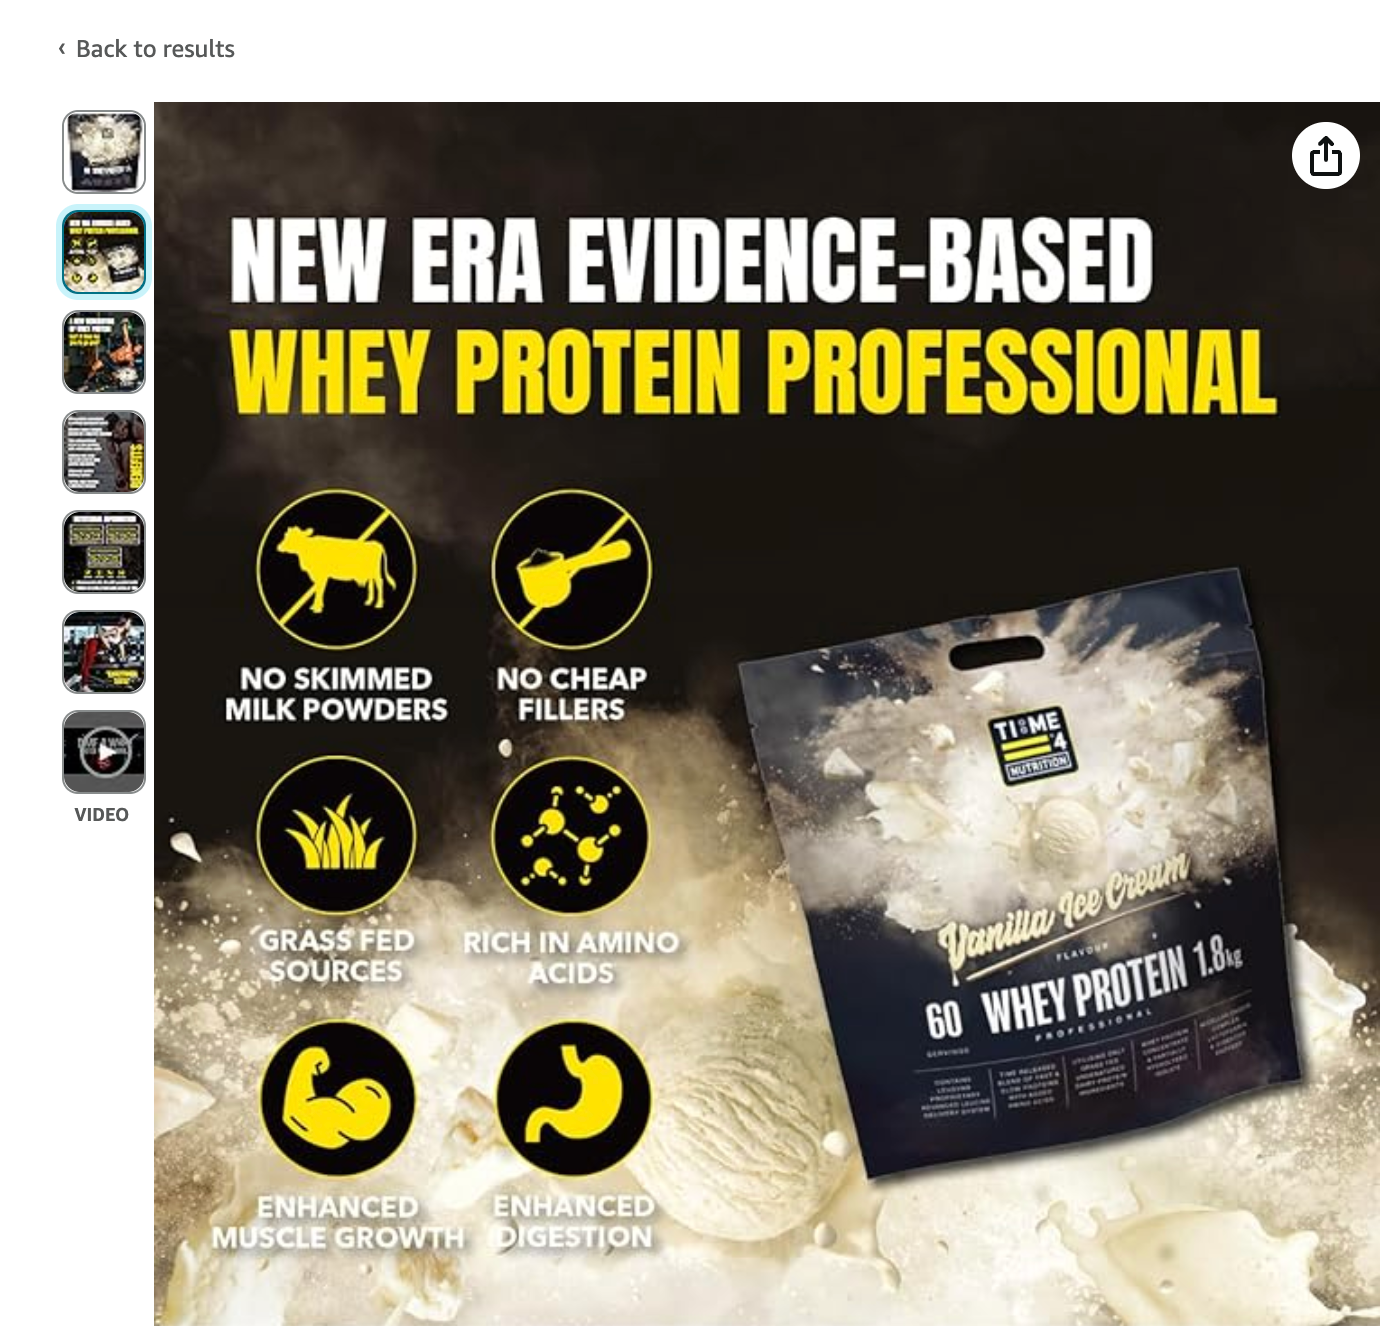 A poster for a new era evidence-based whey protein professional